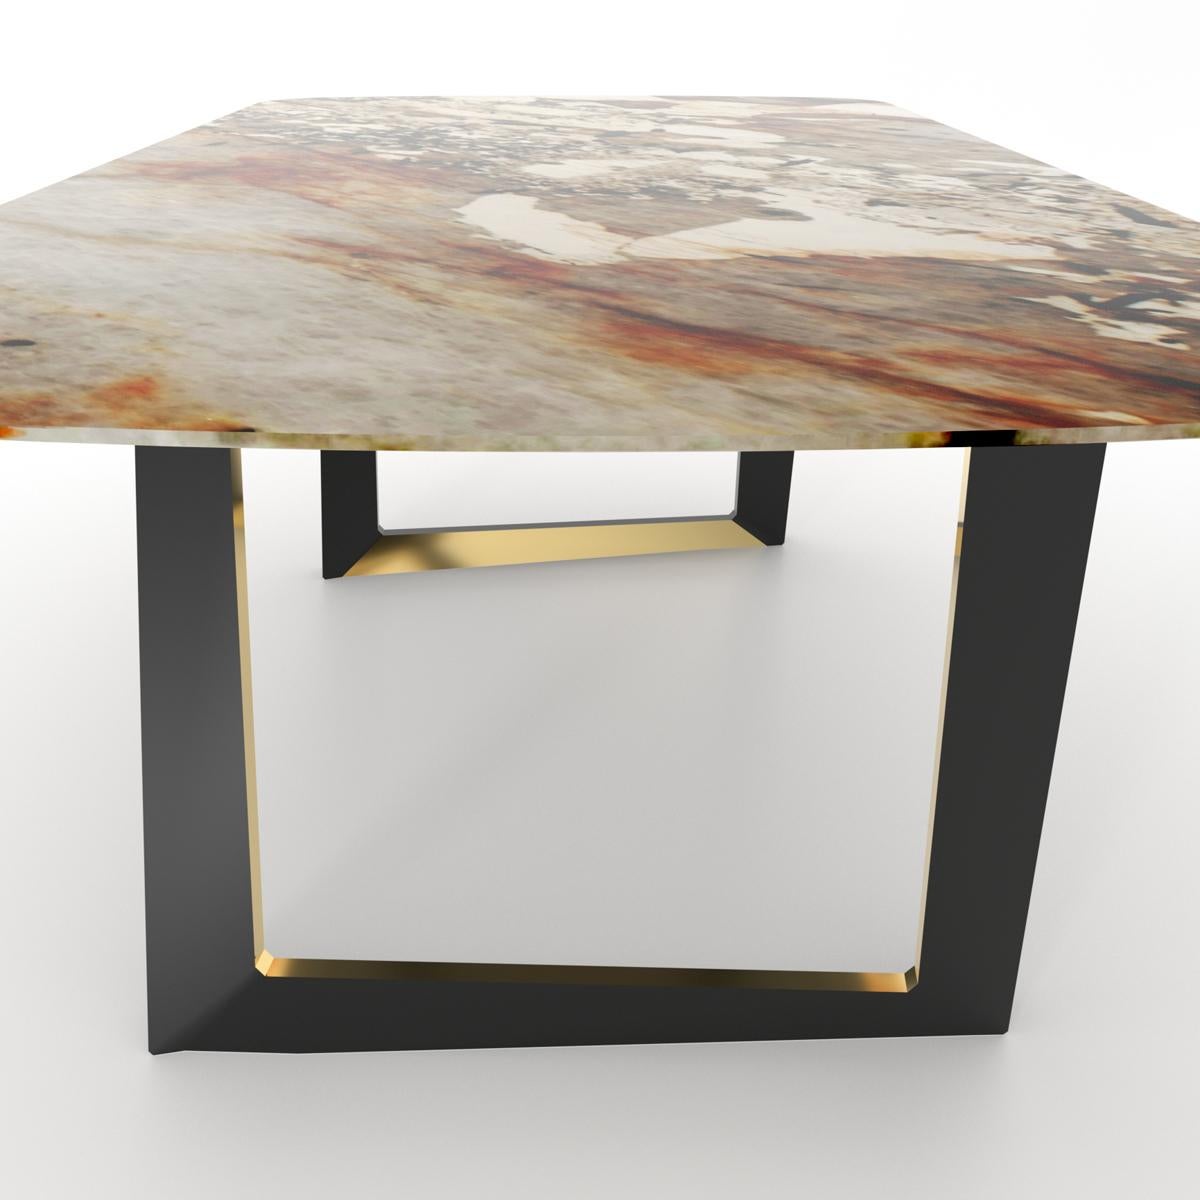 Portuguese Calypso Dinning Table with Patagonia Granite and LED Lights